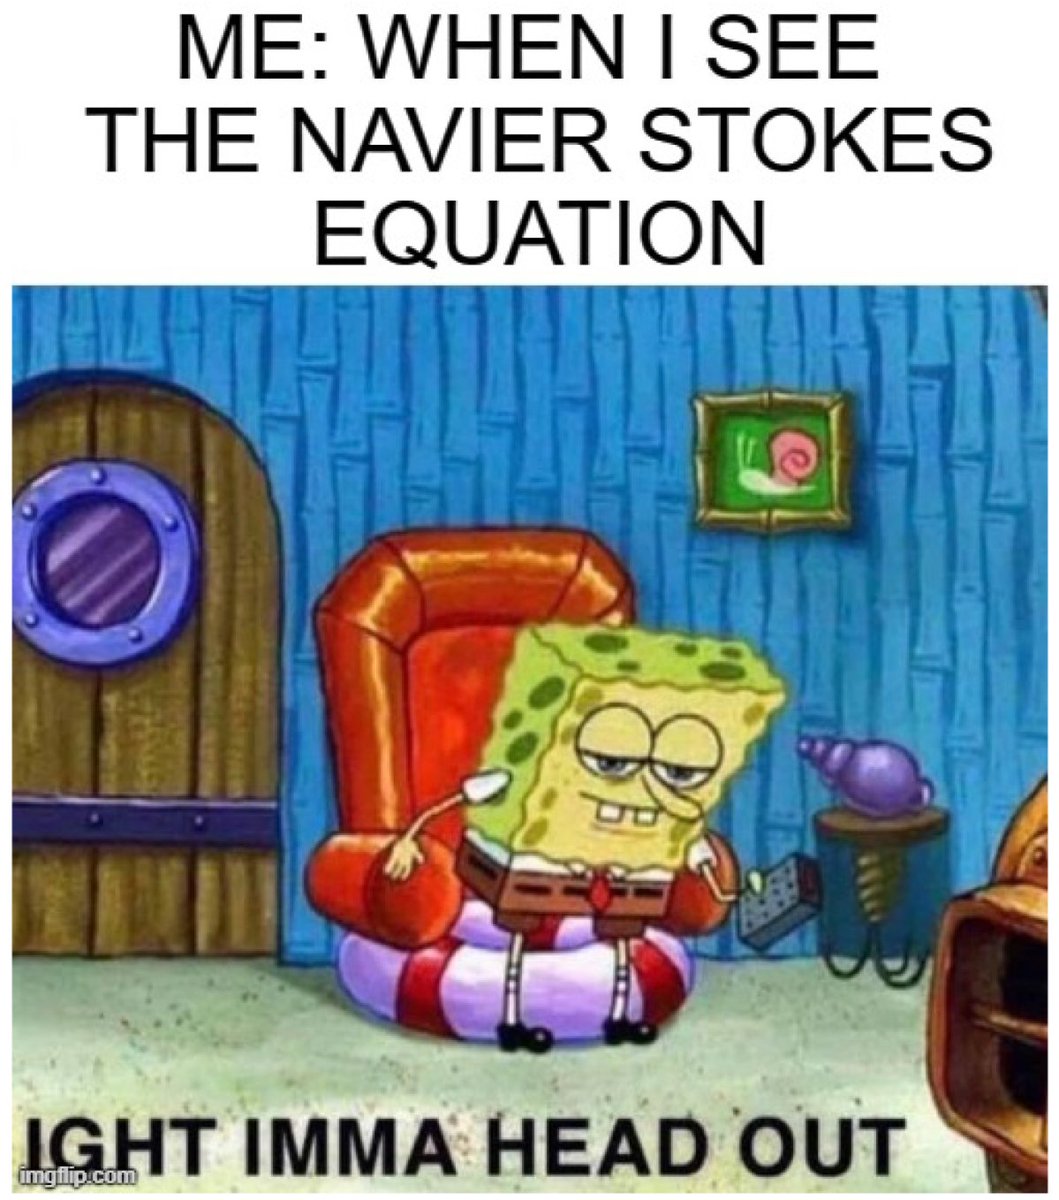 In particular, the Navier-Stokes equations can be...intimidating